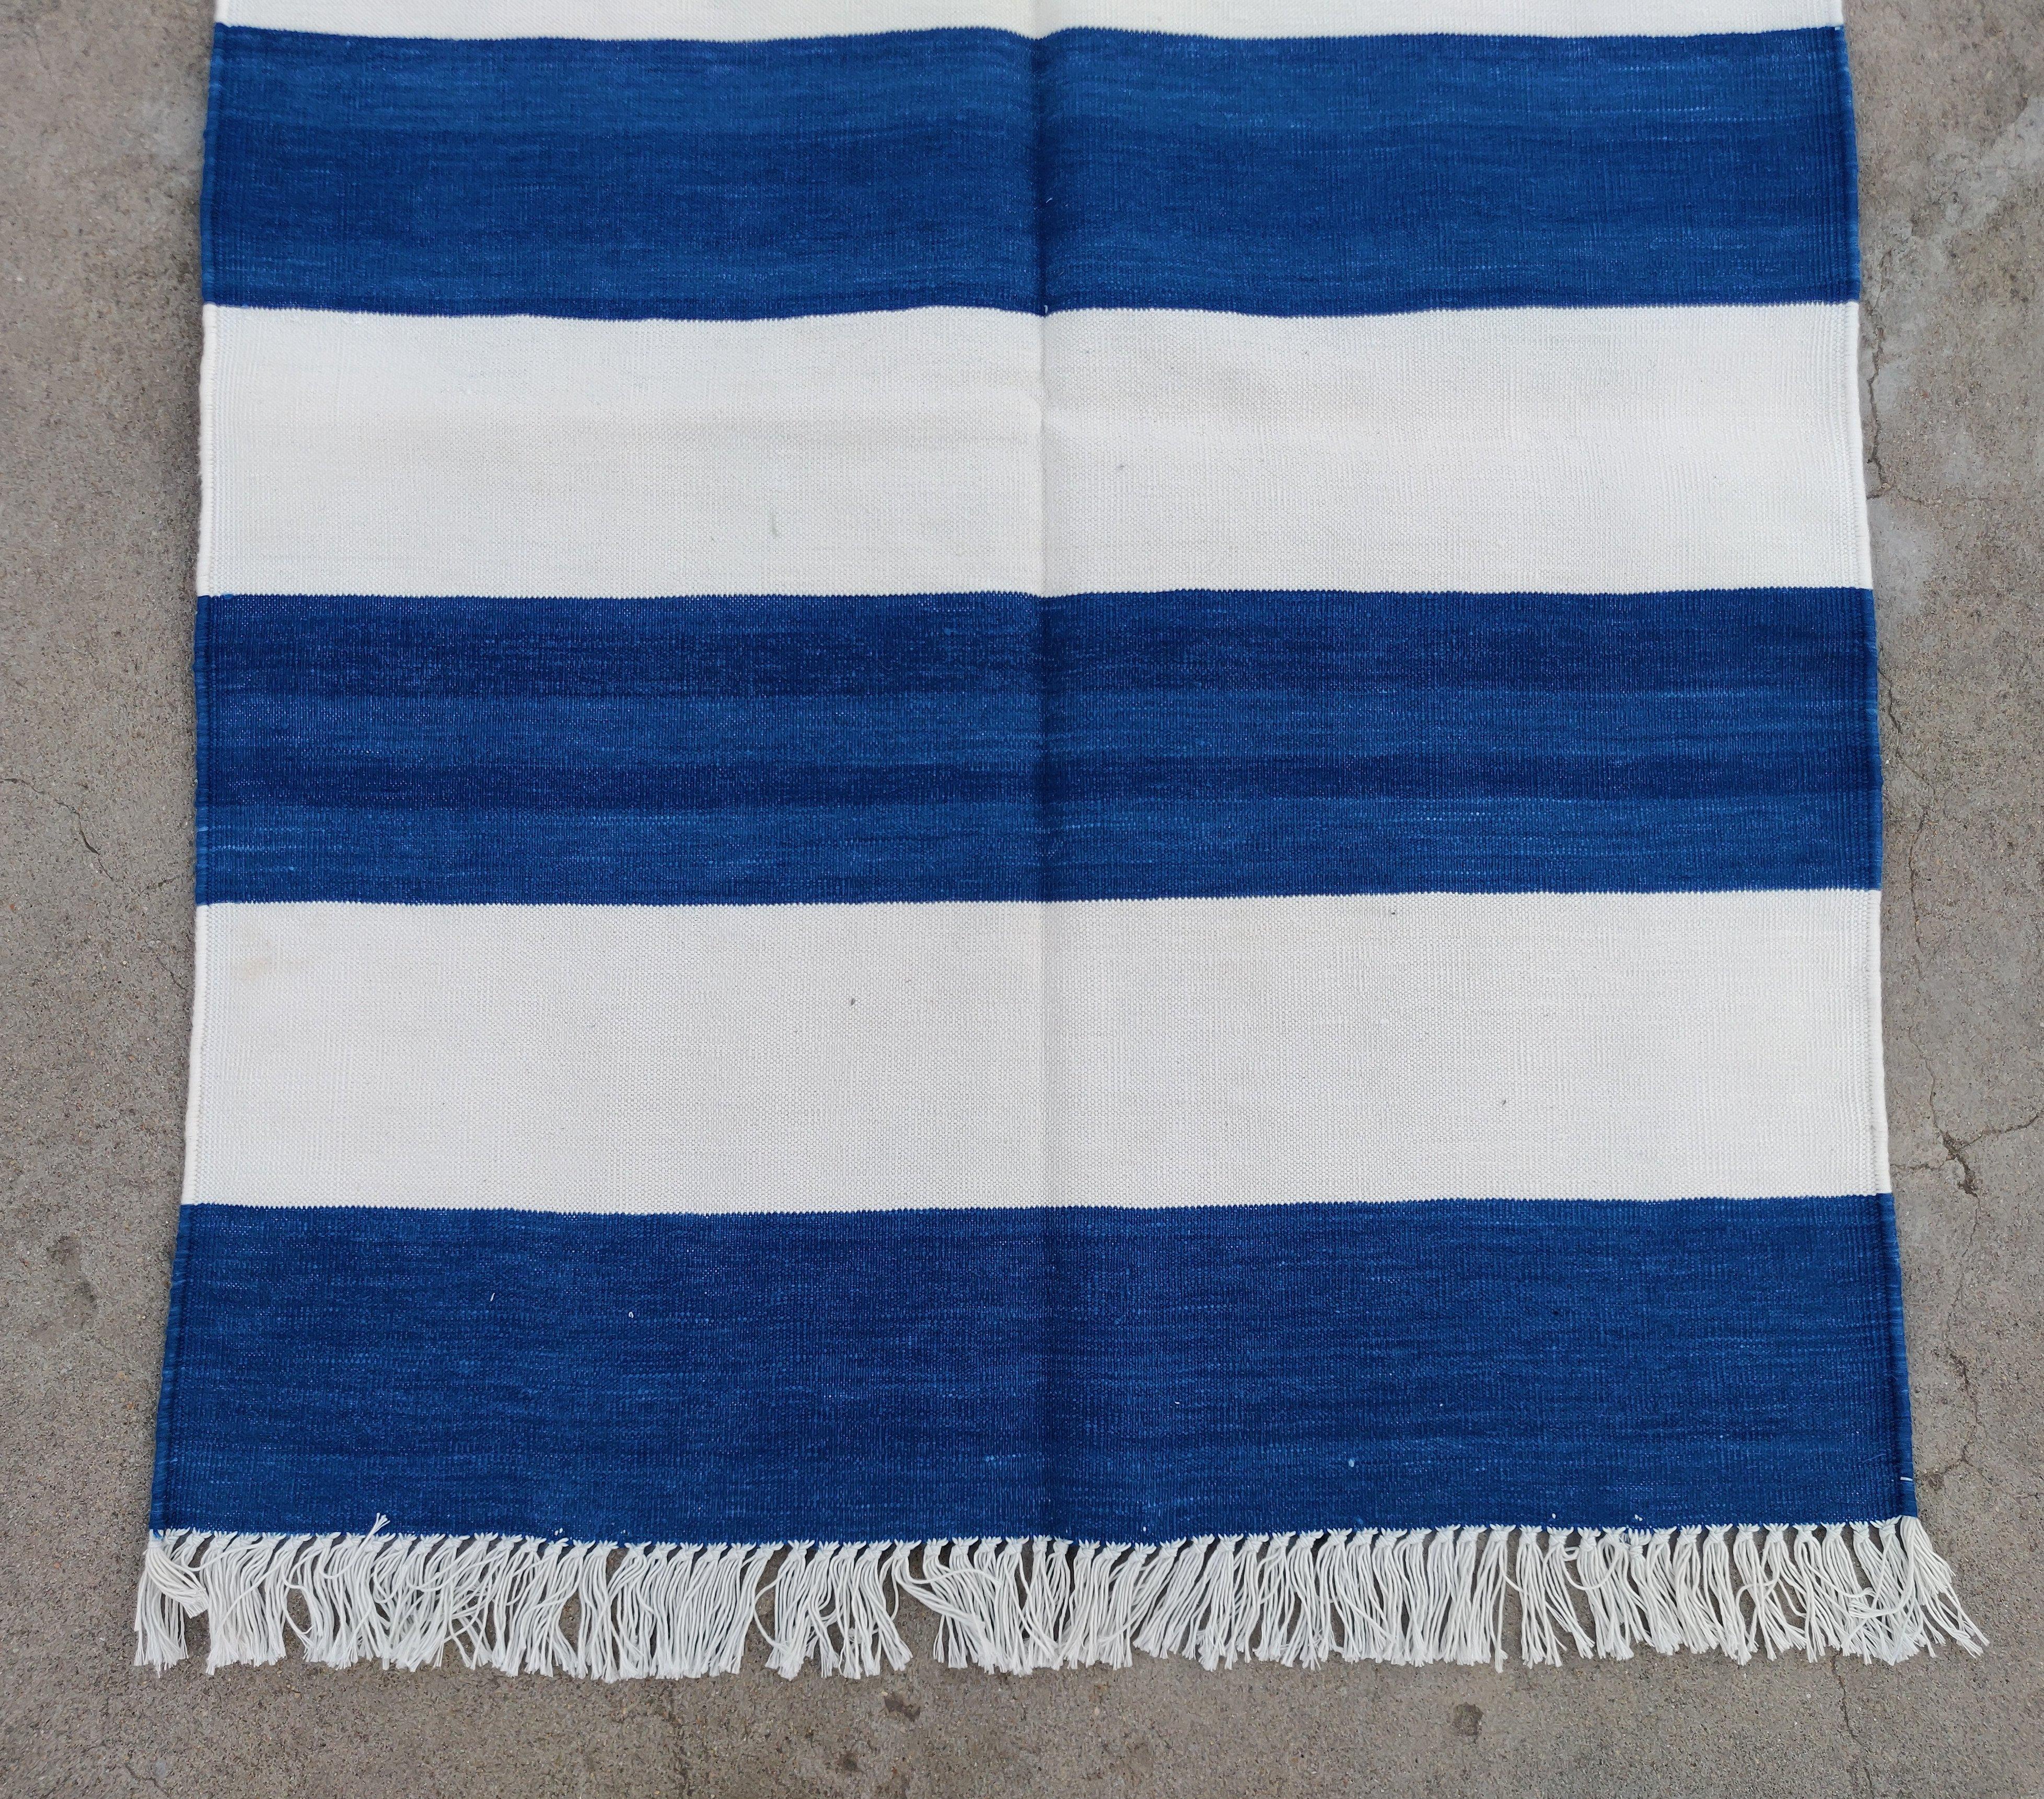 Contemporary Handmade Cotton Area Flat Weave Runner, 2.5x8 Blue, White Striped Indian Dhurrie For Sale